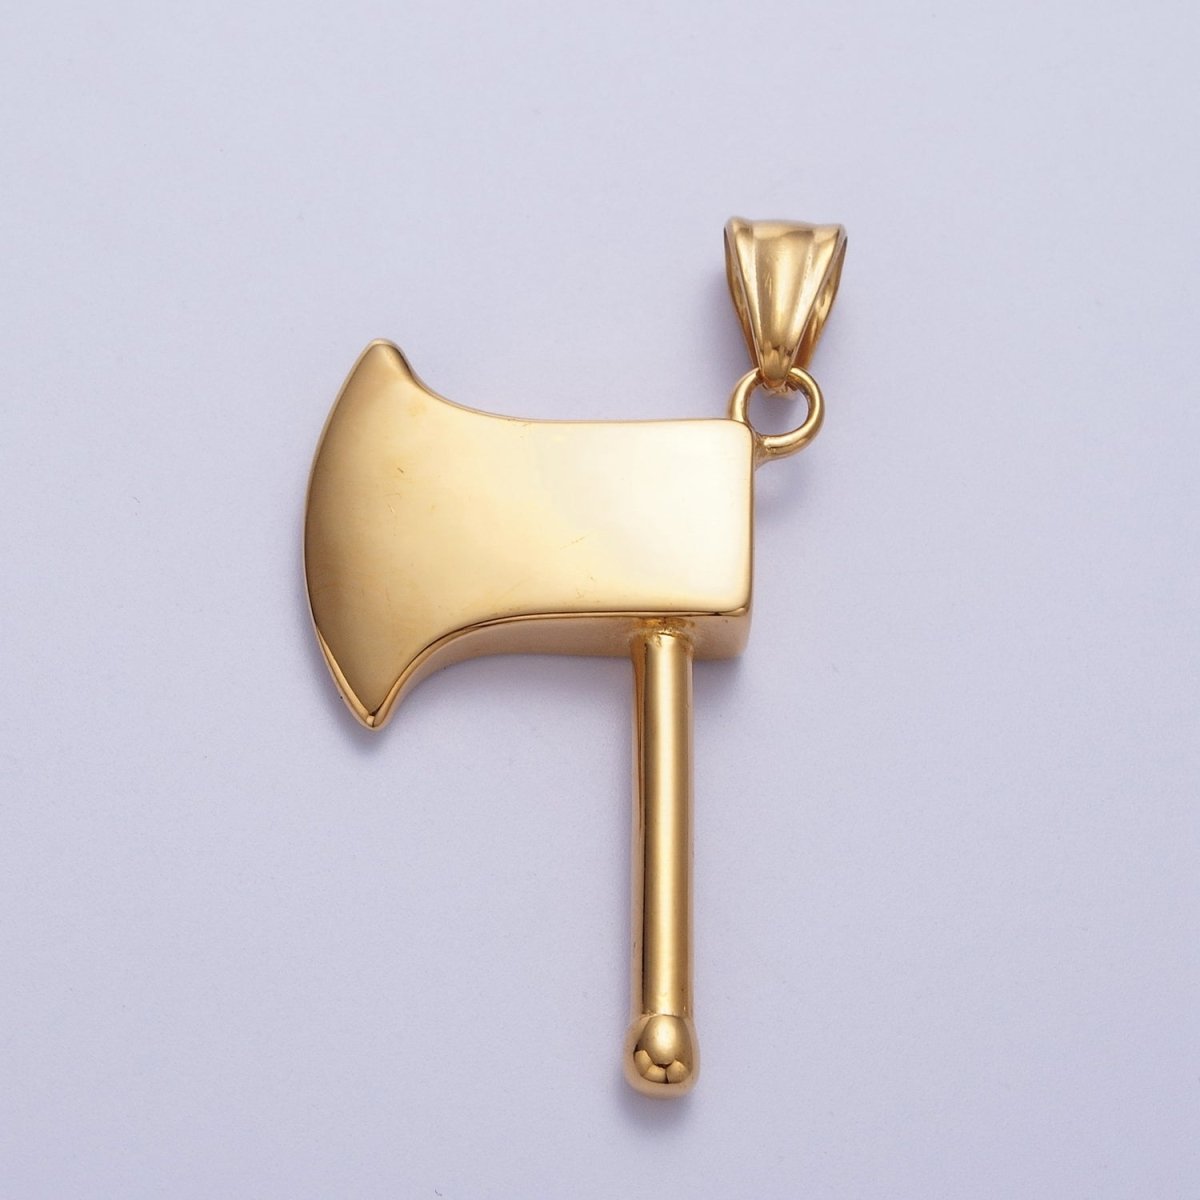 Gold Stainless Steel Axe Weapon Pendant For Jewelry Making Component | X-658 - DLUXCA